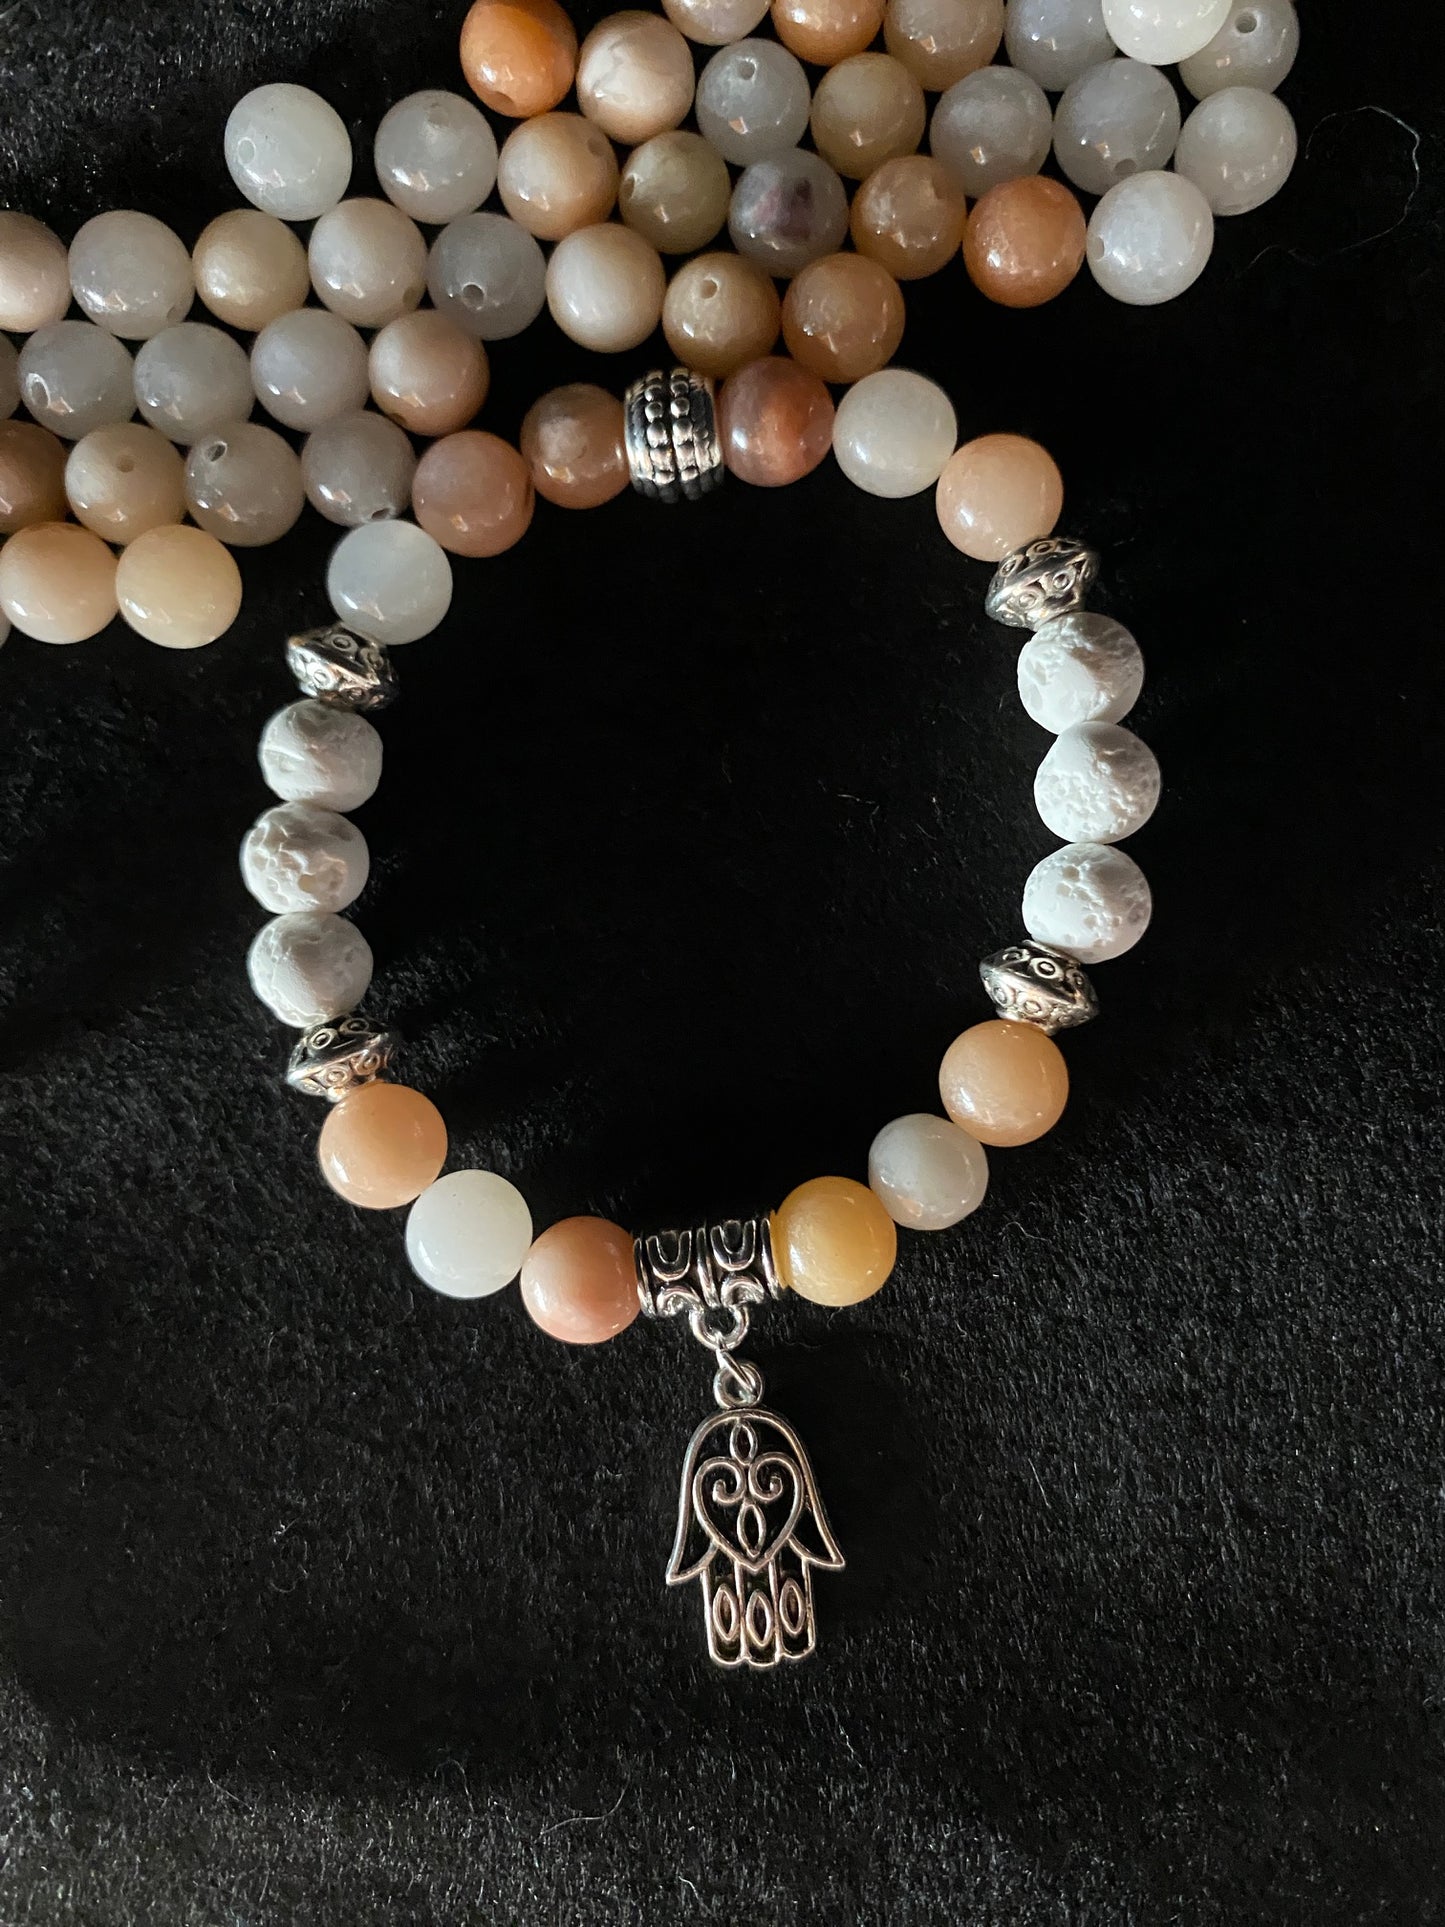 A Touch of Blush—Aromatherapy Diffuser Bracelet